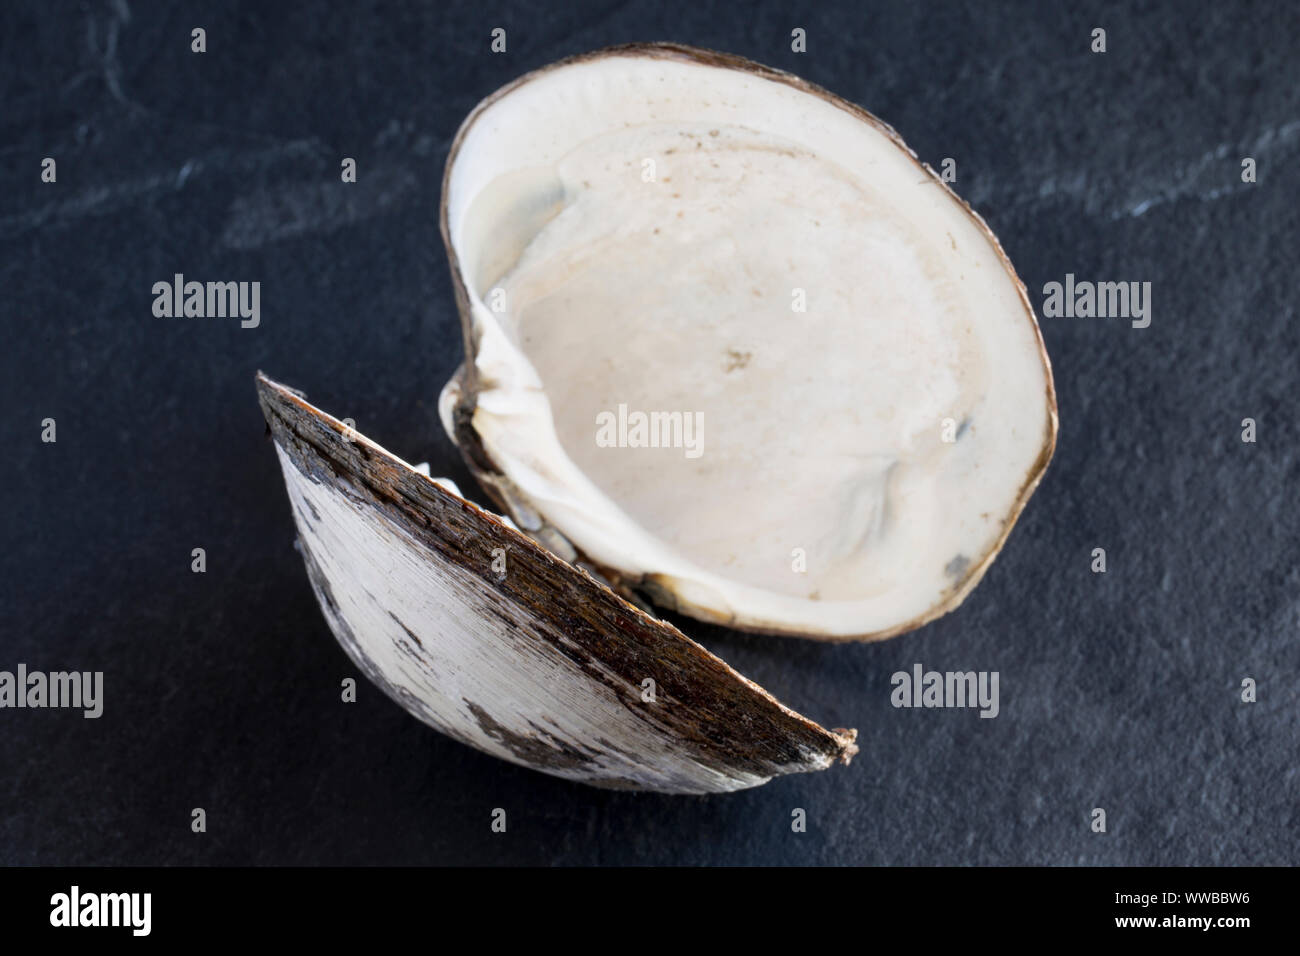 An Icelandic cyprine clam, Arctica islandica,  found in the English Channel. The Icelandic cyprine is one of the longest living organisms on Earth wit Stock Photo